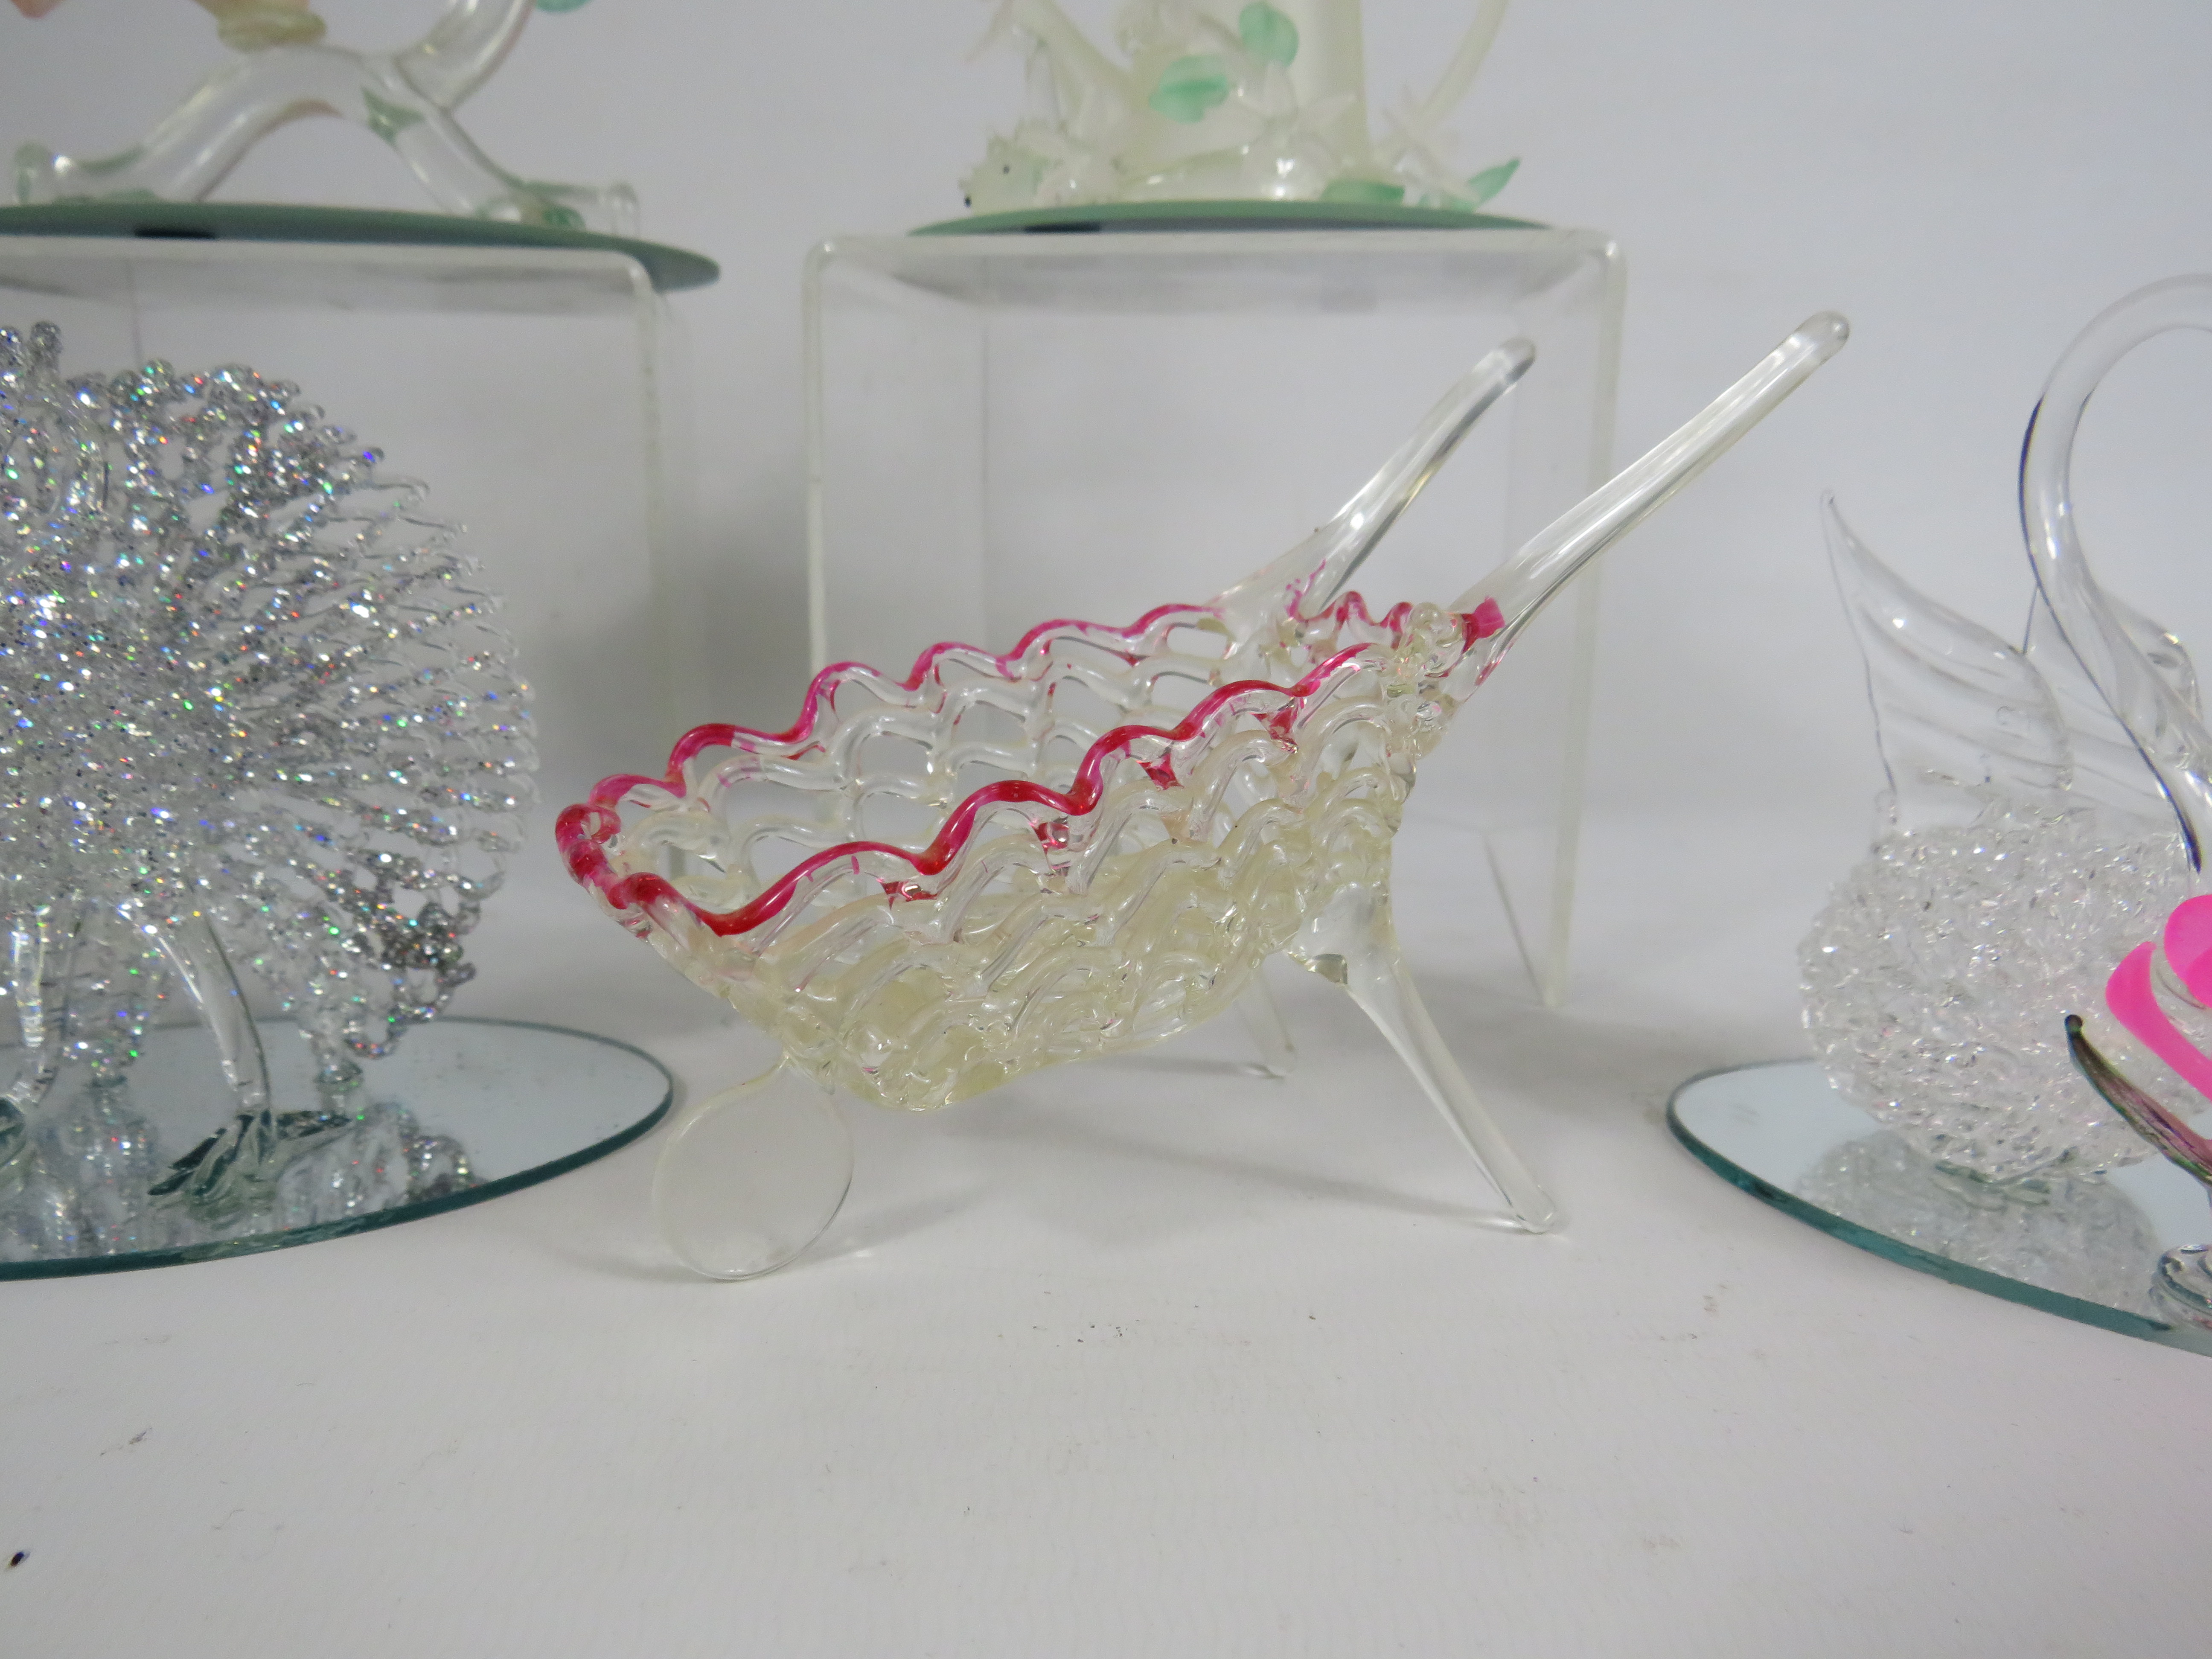 Five art glass figurines on mirrored bases and a lattice glass wheel barrow, - Image 2 of 3